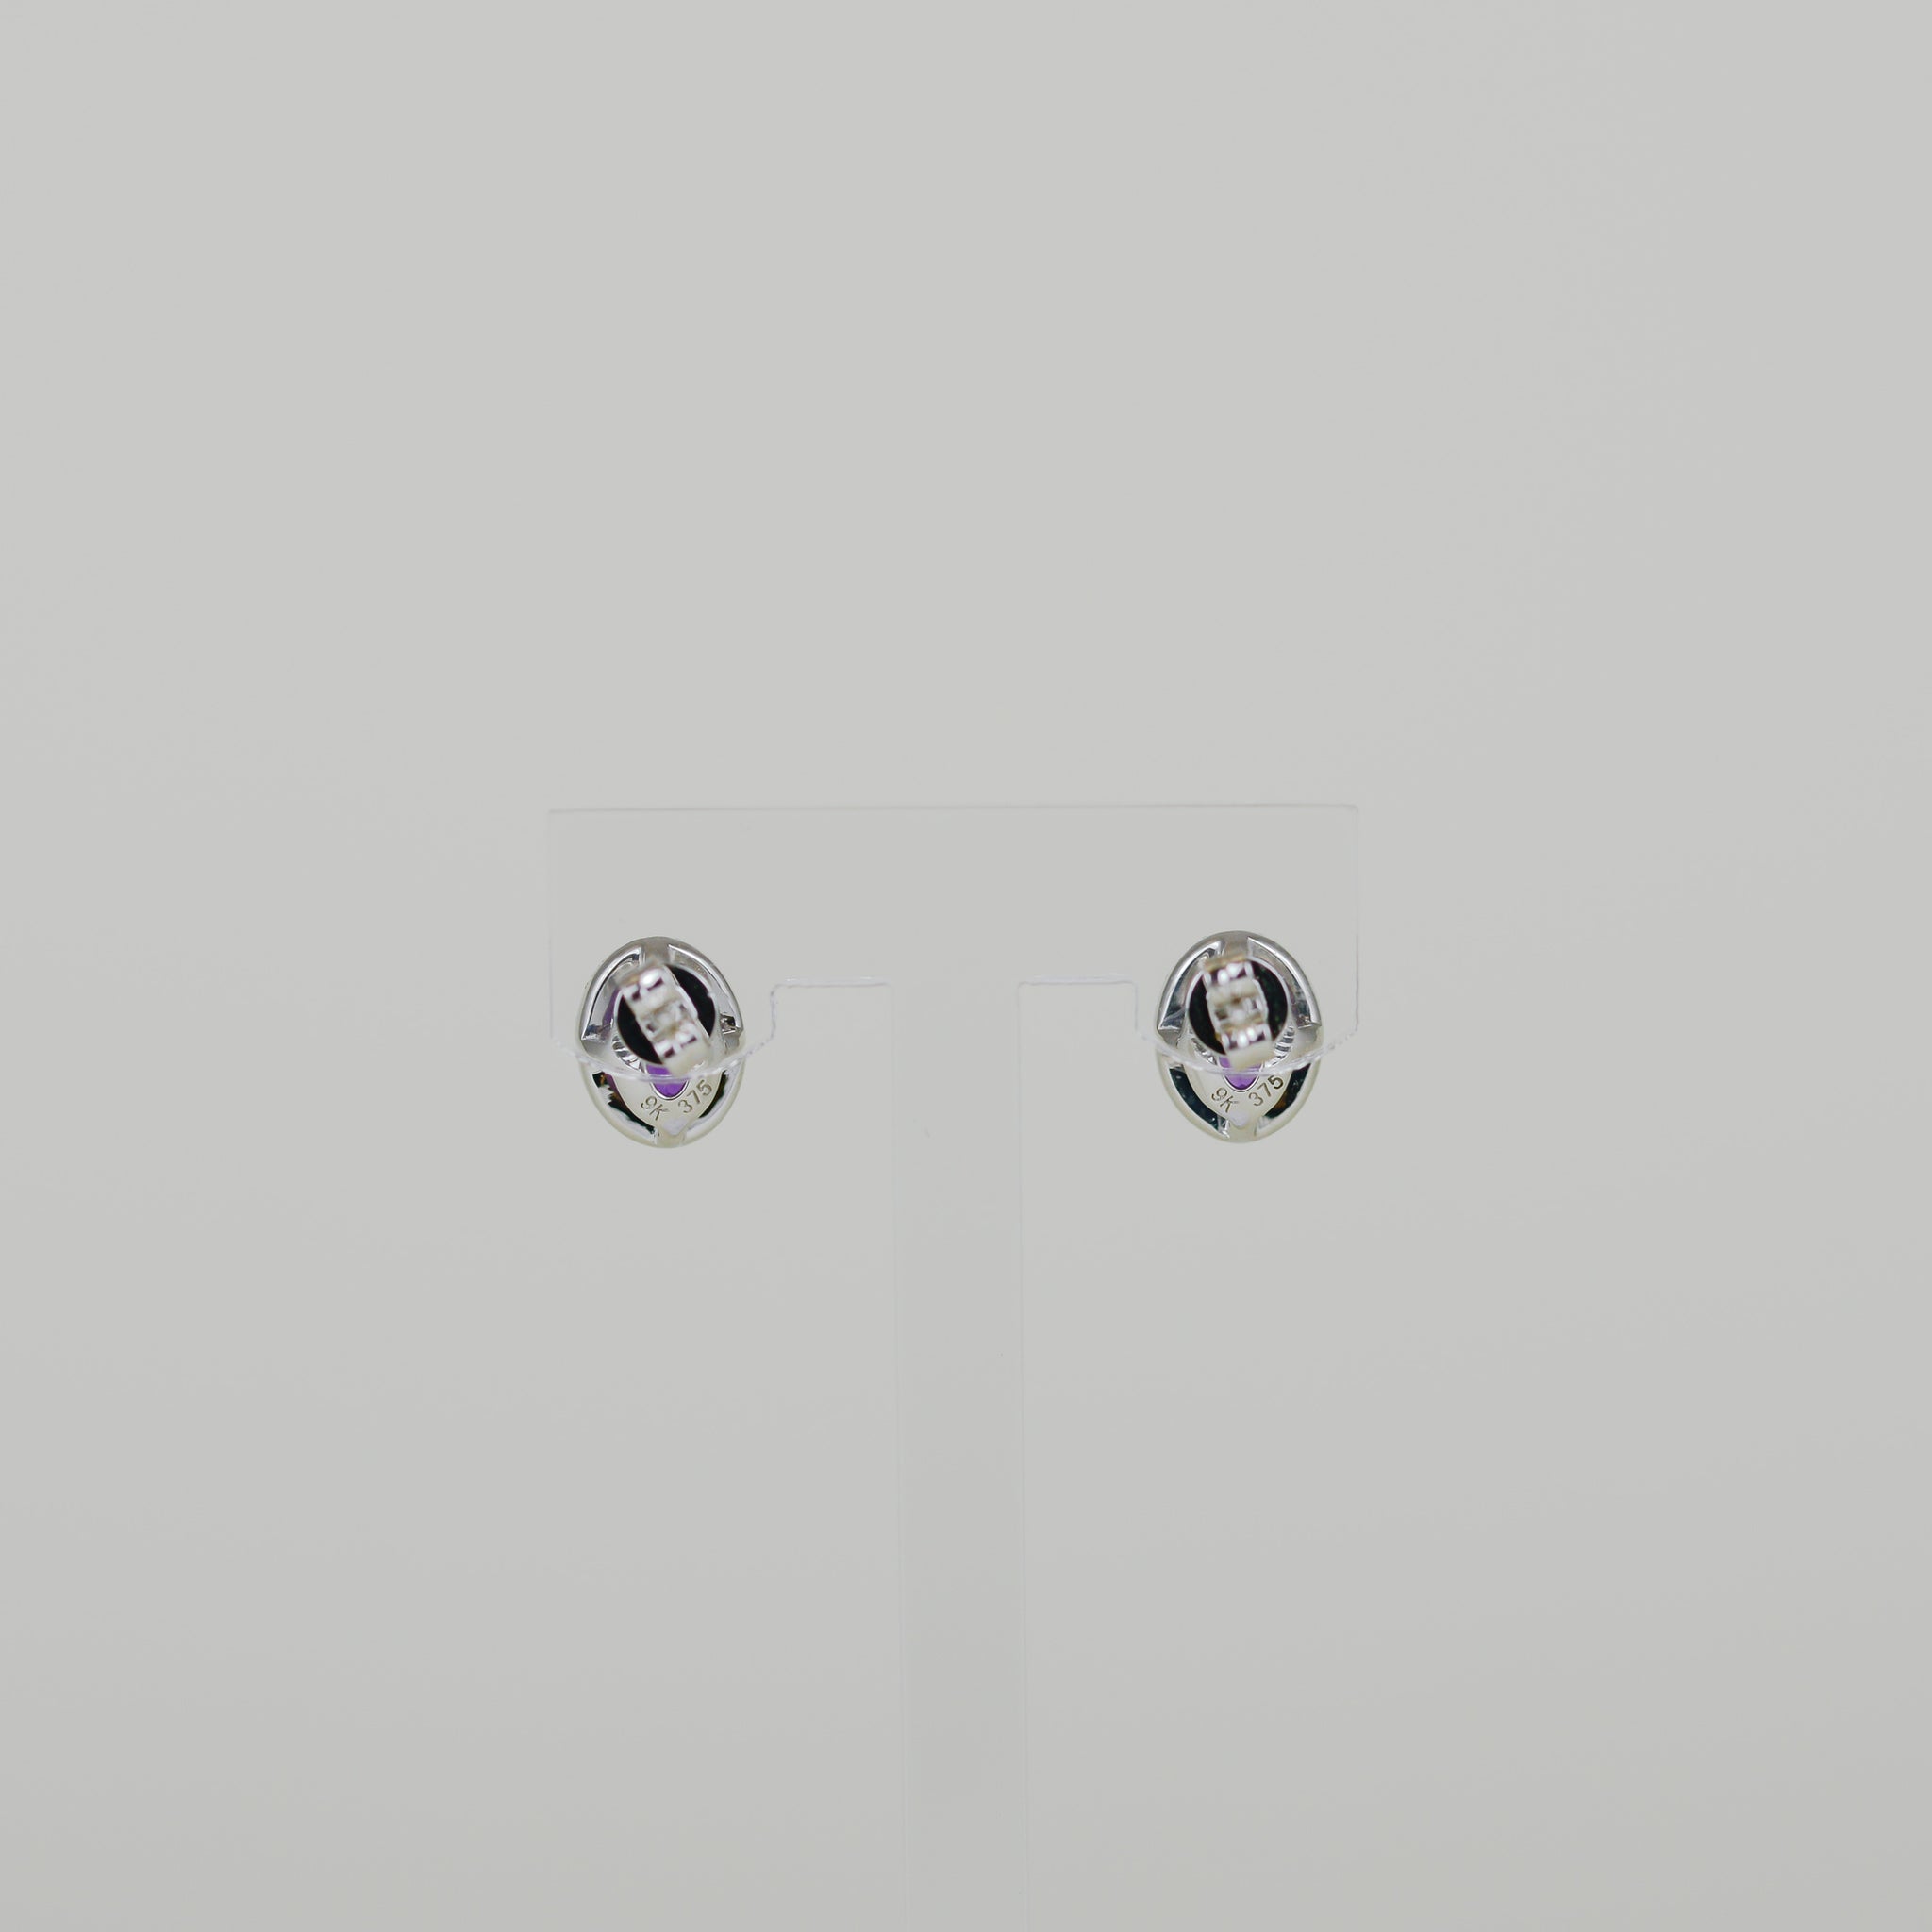 9ct White Gold 1.54ct Oval Amethyst an Diamond Halo Earrings